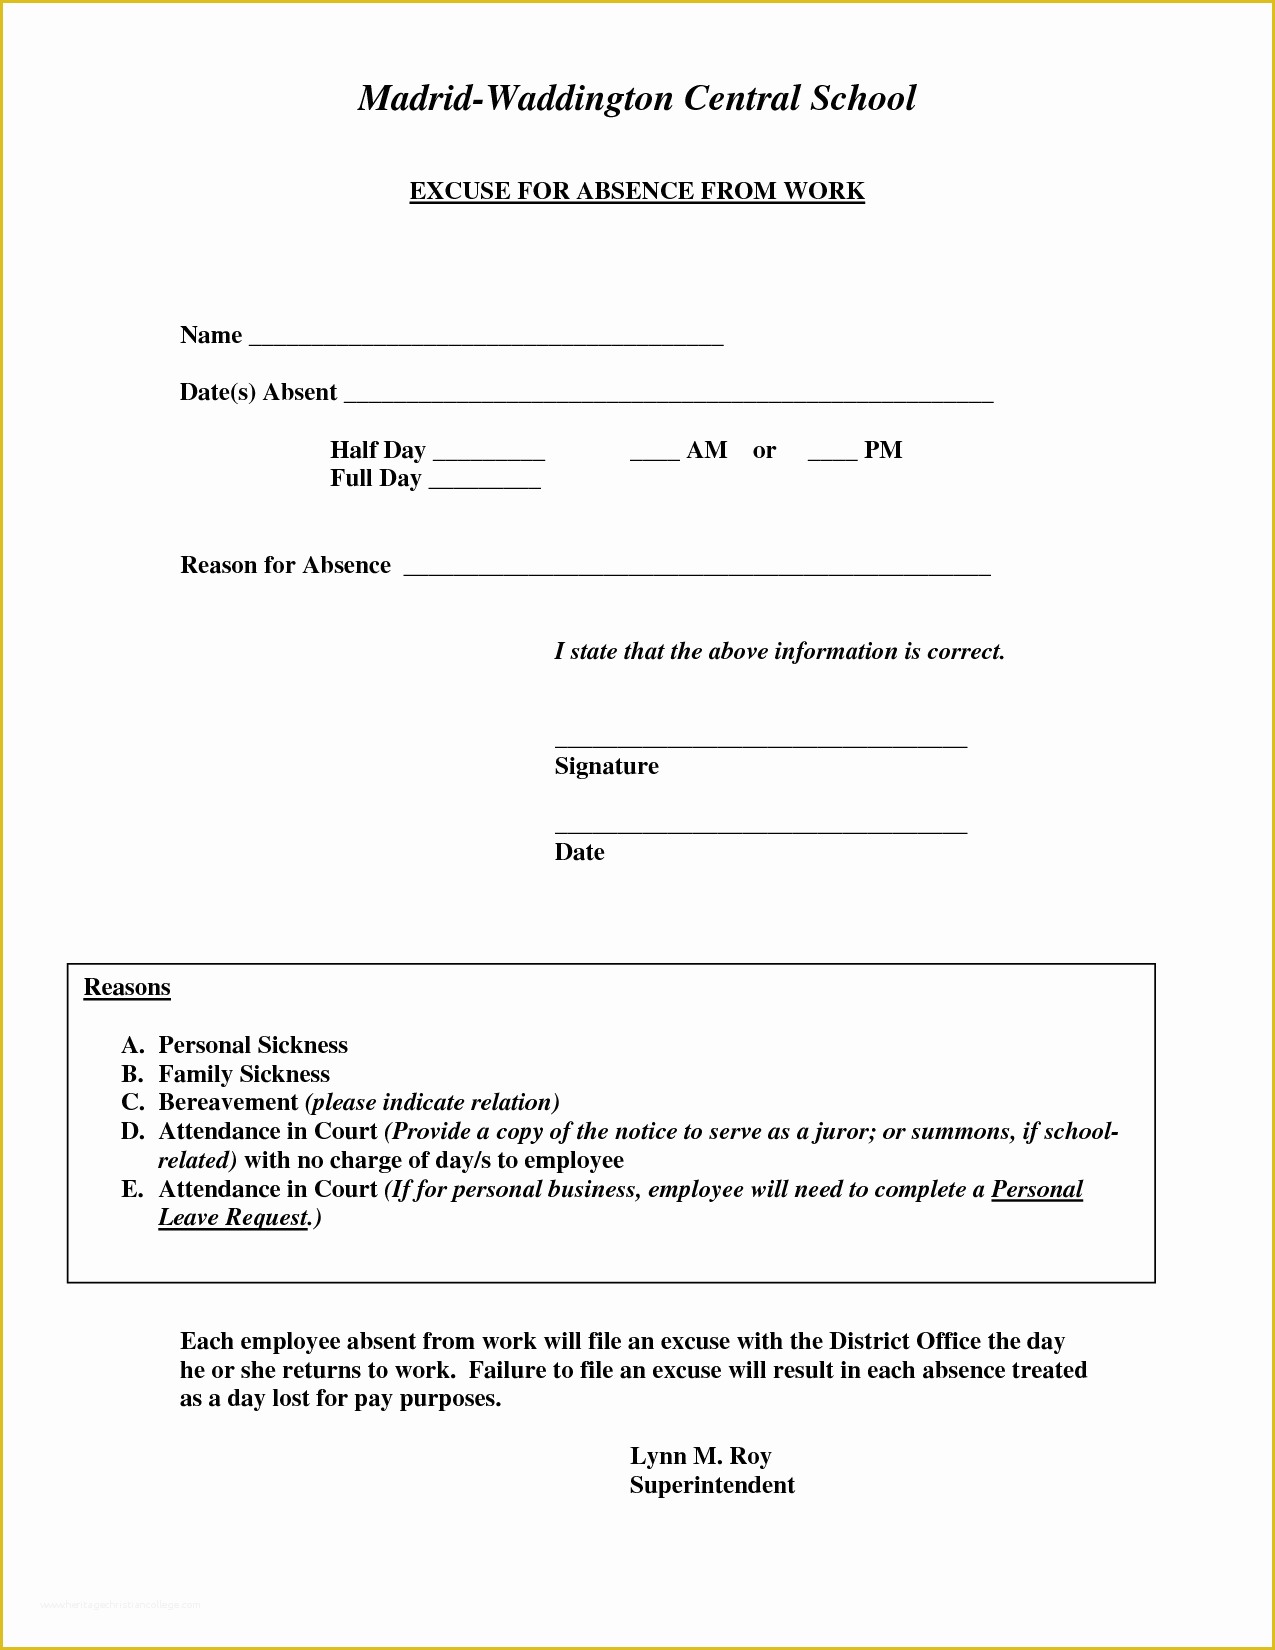 Free Doctors Excuse Template Of Doctors Excuse for Work Template